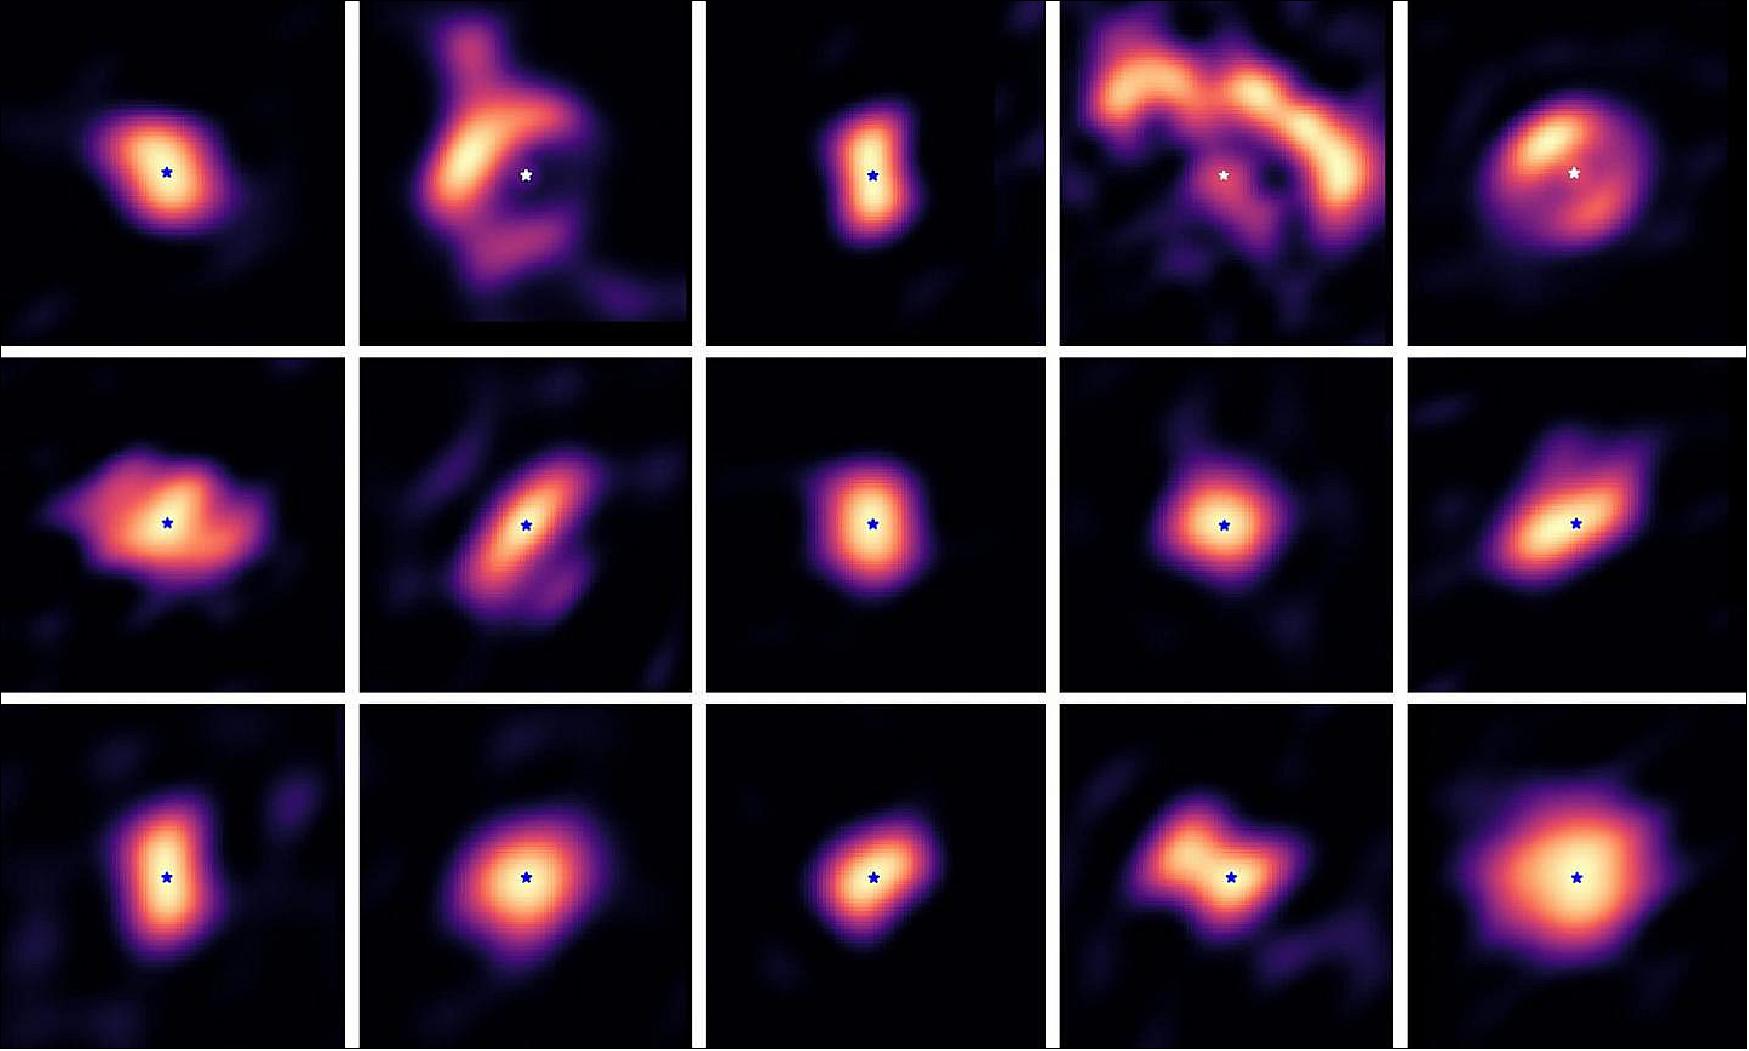 Figure 38: The fifteen images of protoplanetary disks, captured with ESO's Very Large Telescope Interferometer (image credit: KU Leuven, ESO)